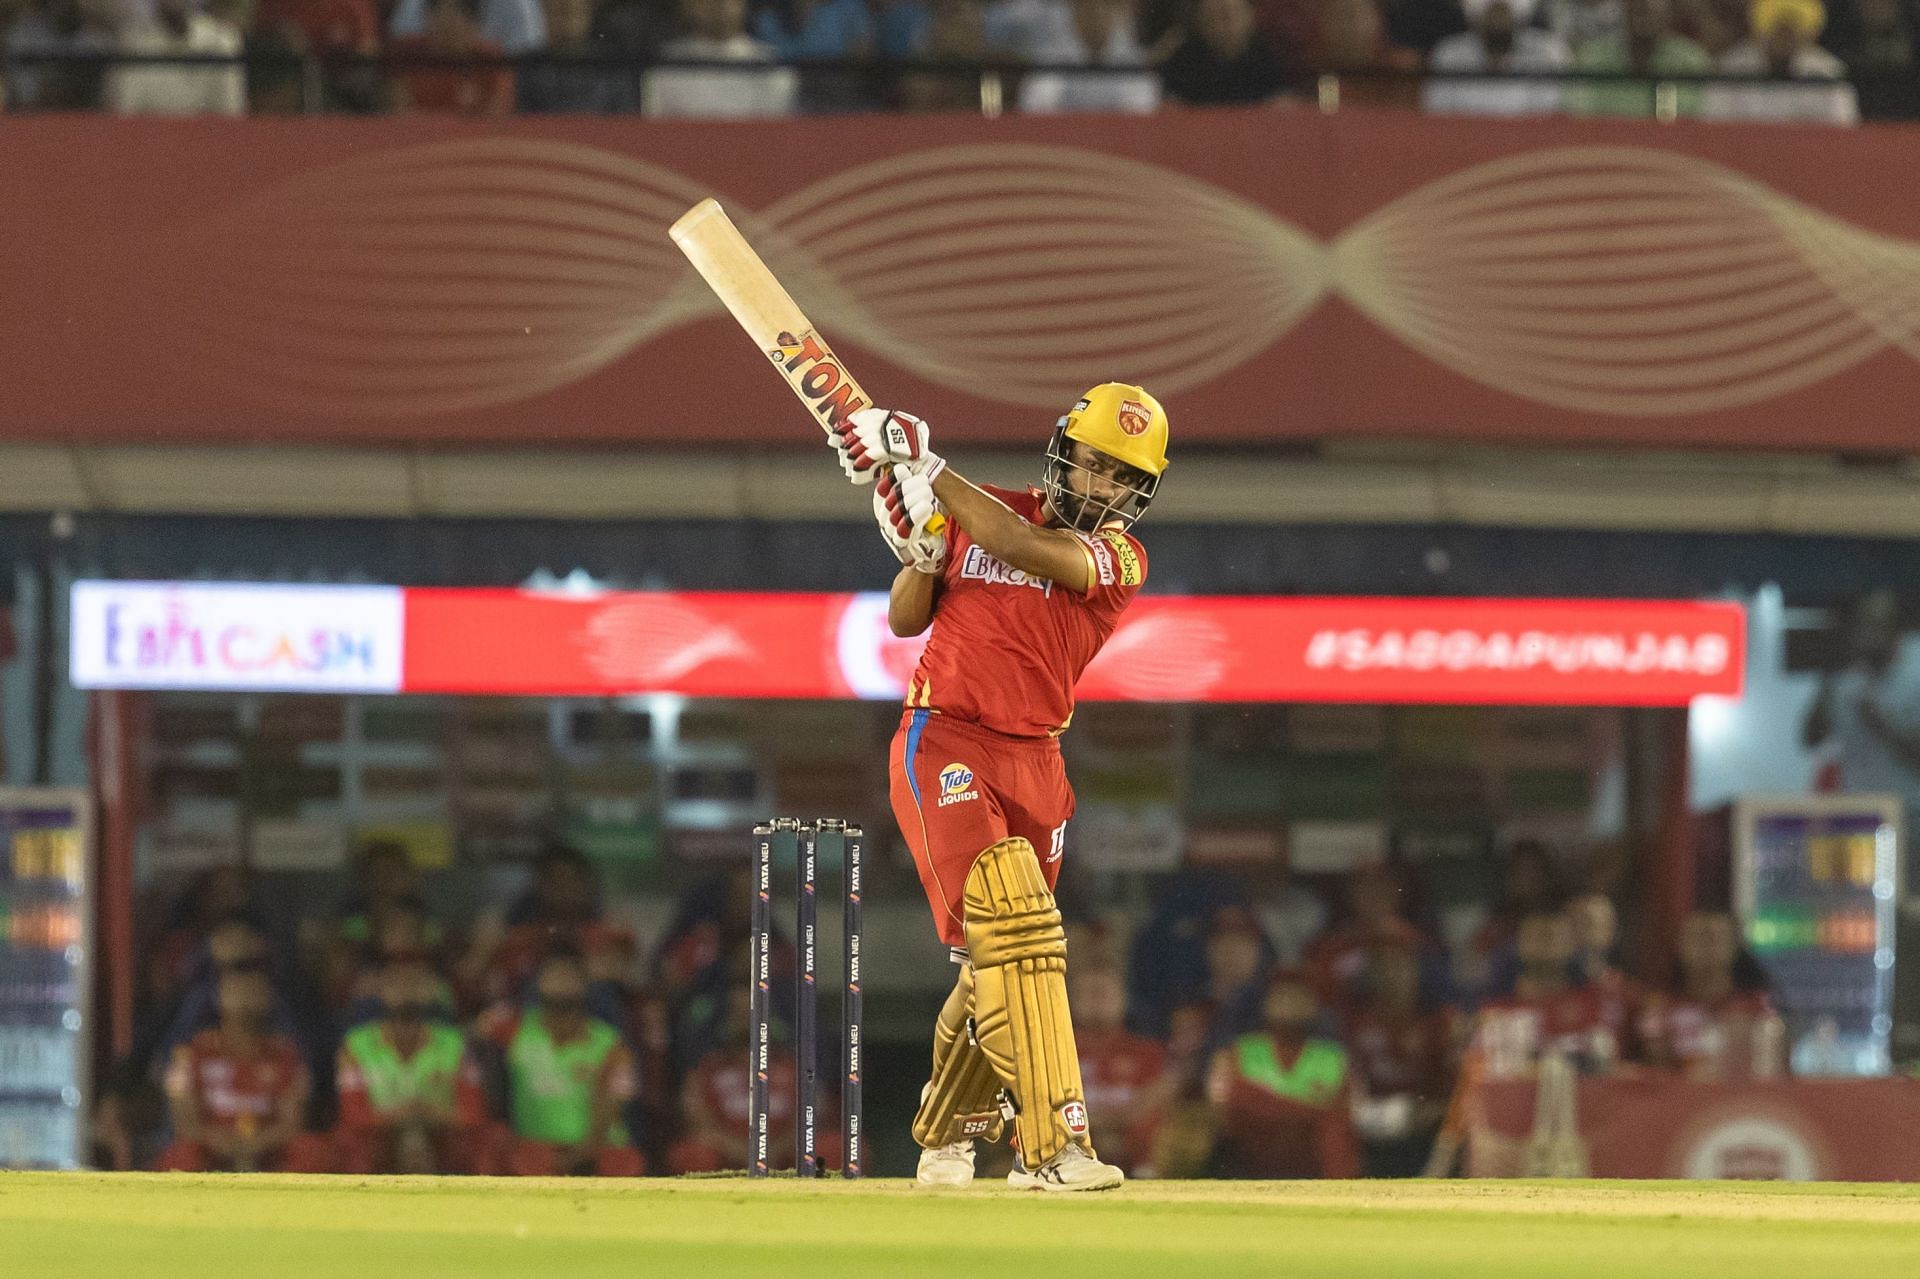 Atharva Taide caught attention with his performances last IPL